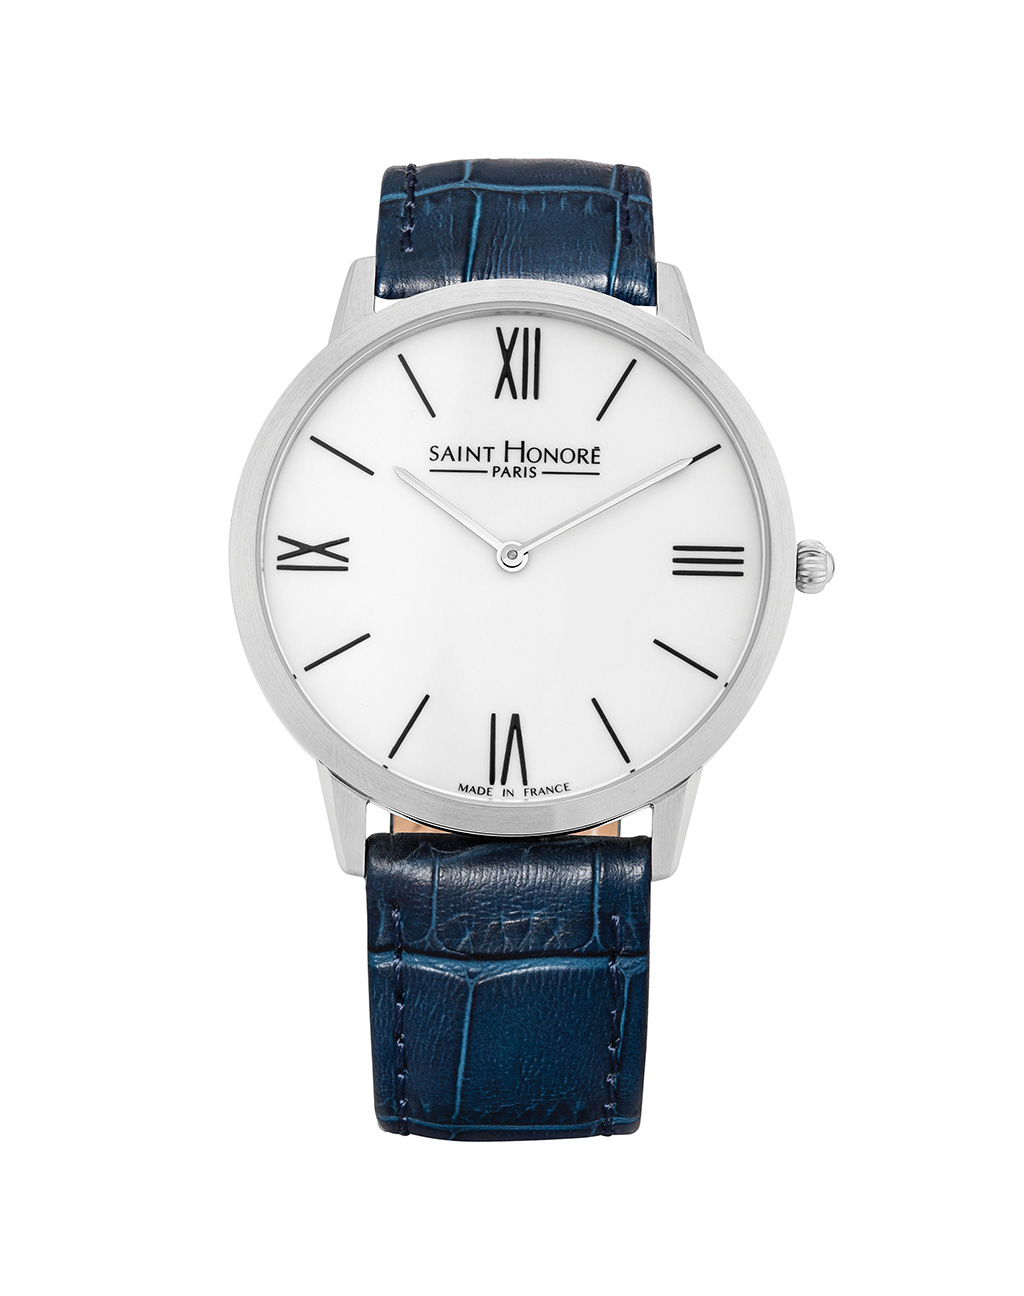 WAGRAM Men's watch - Stainless steel, white dial, blue leather strap